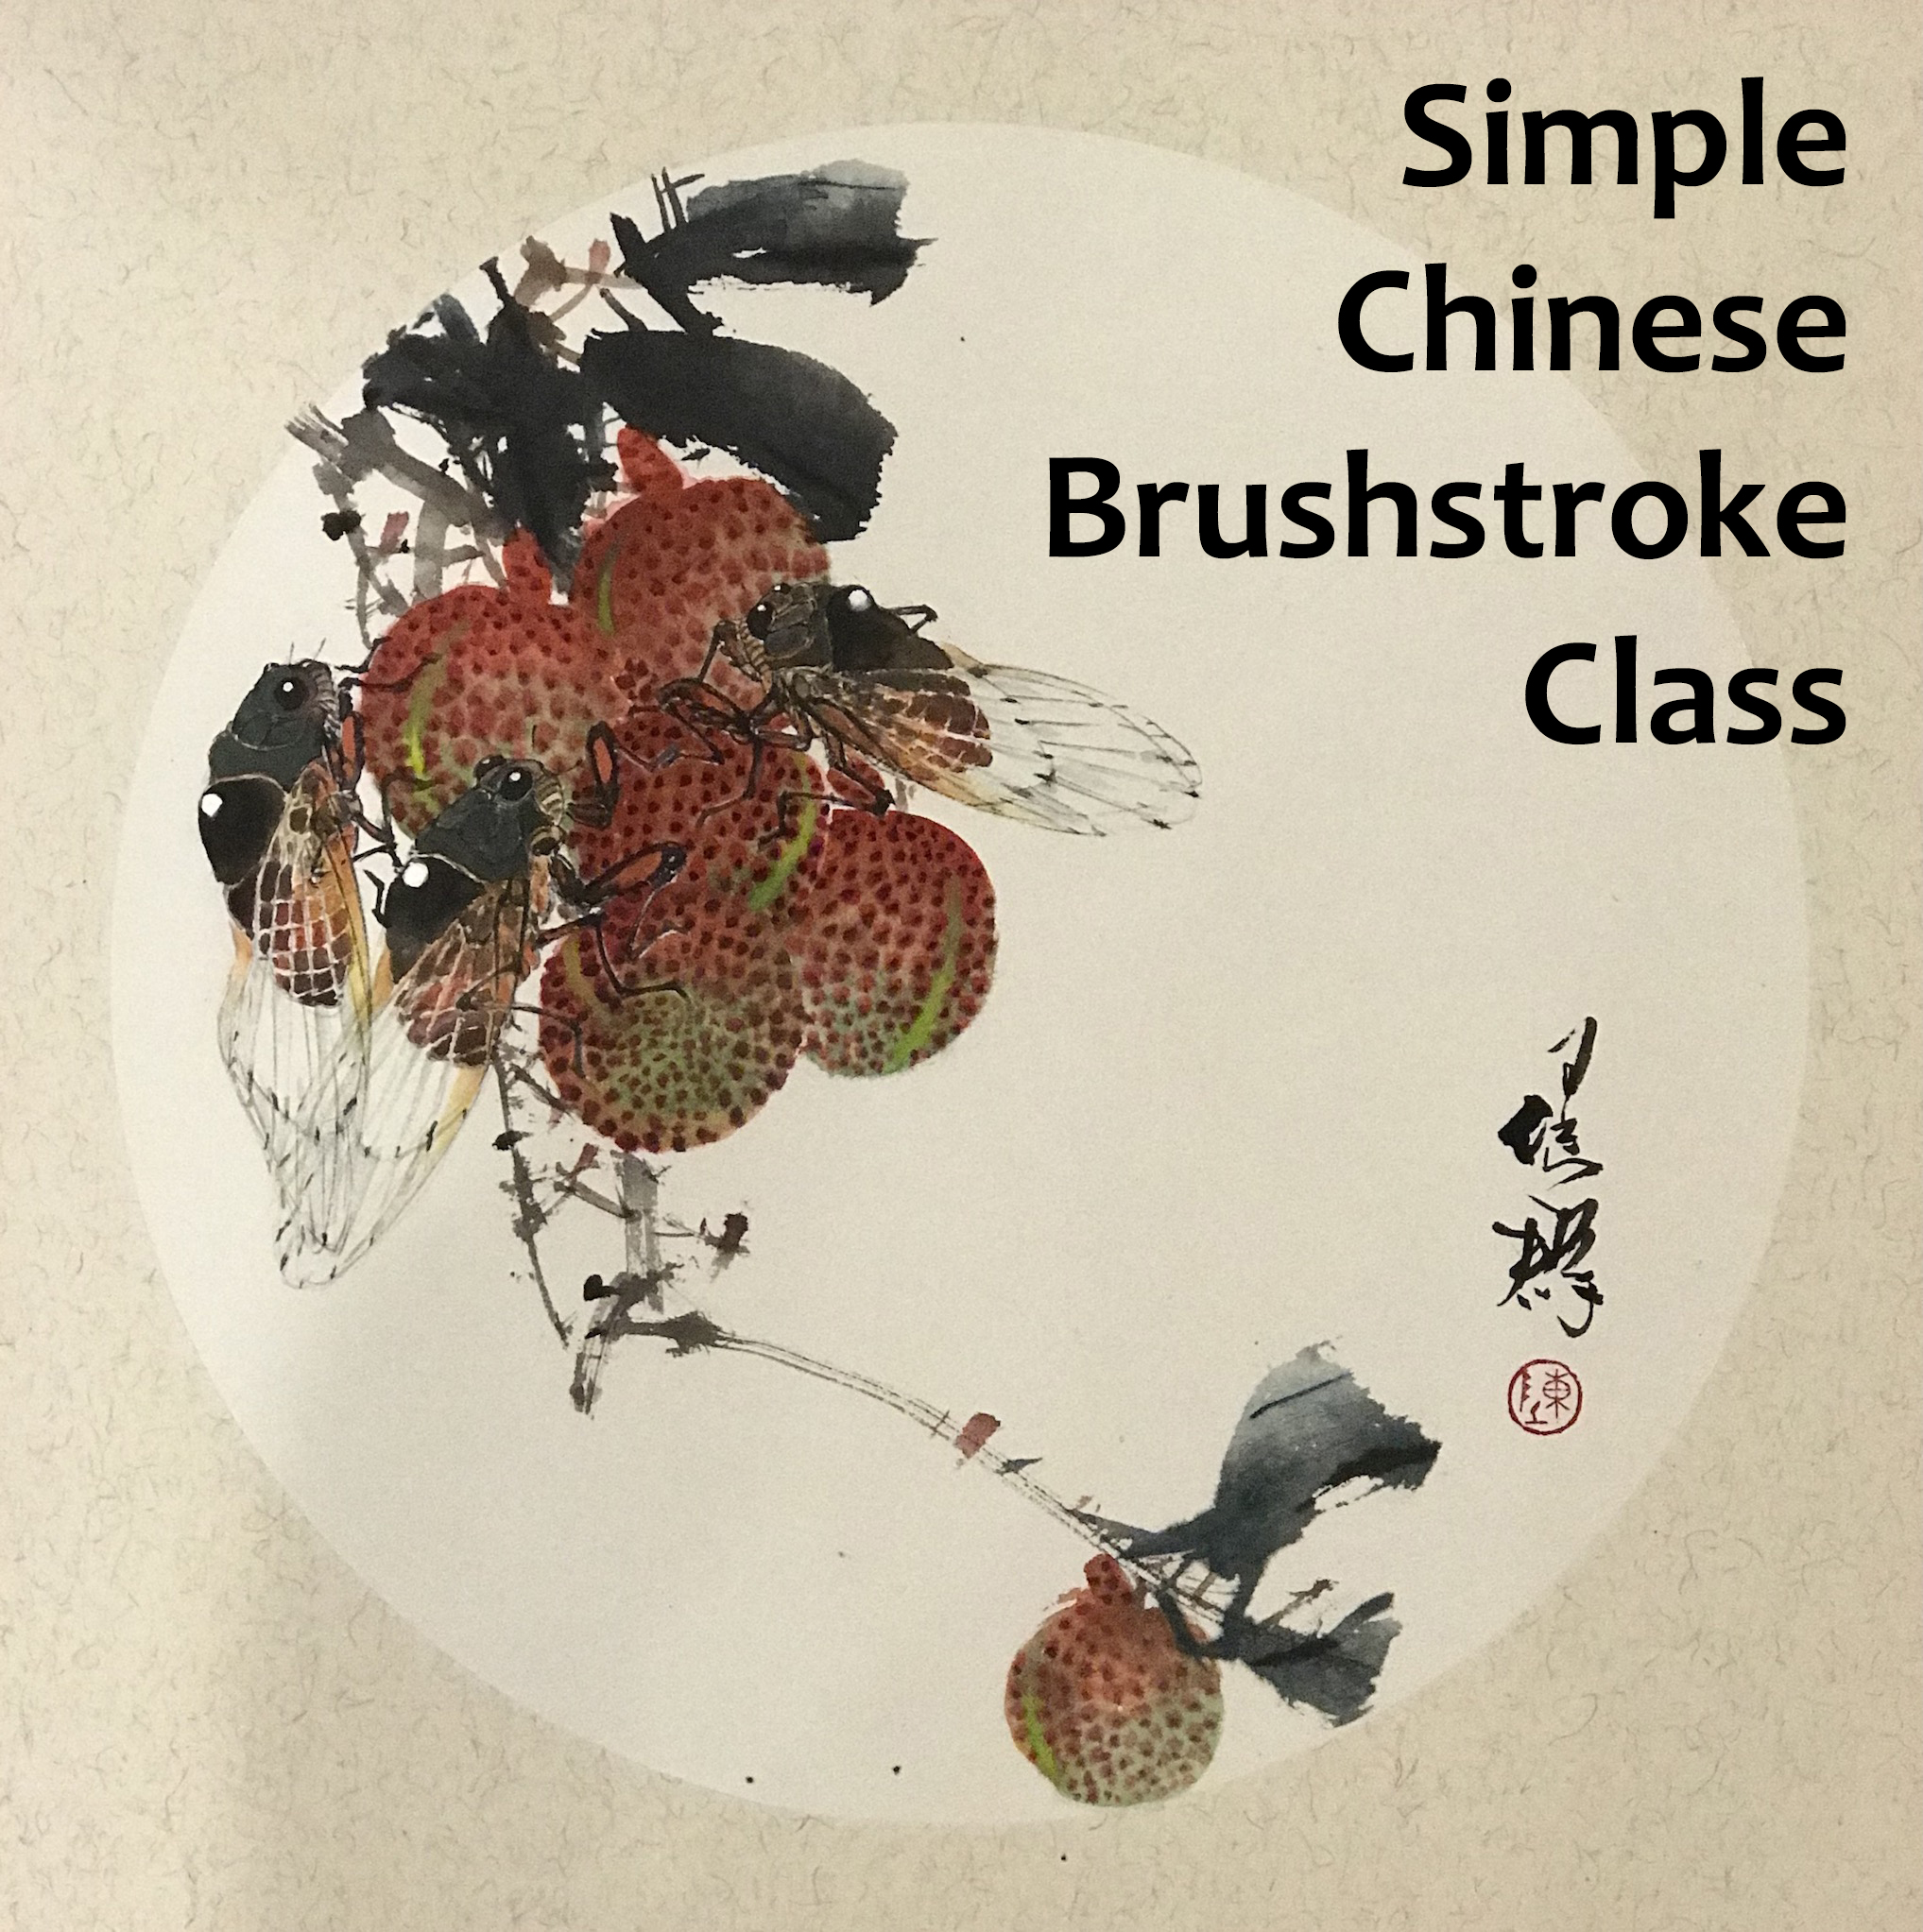 Simple Chinese Brushstroke Class at Hayward Downtown Library